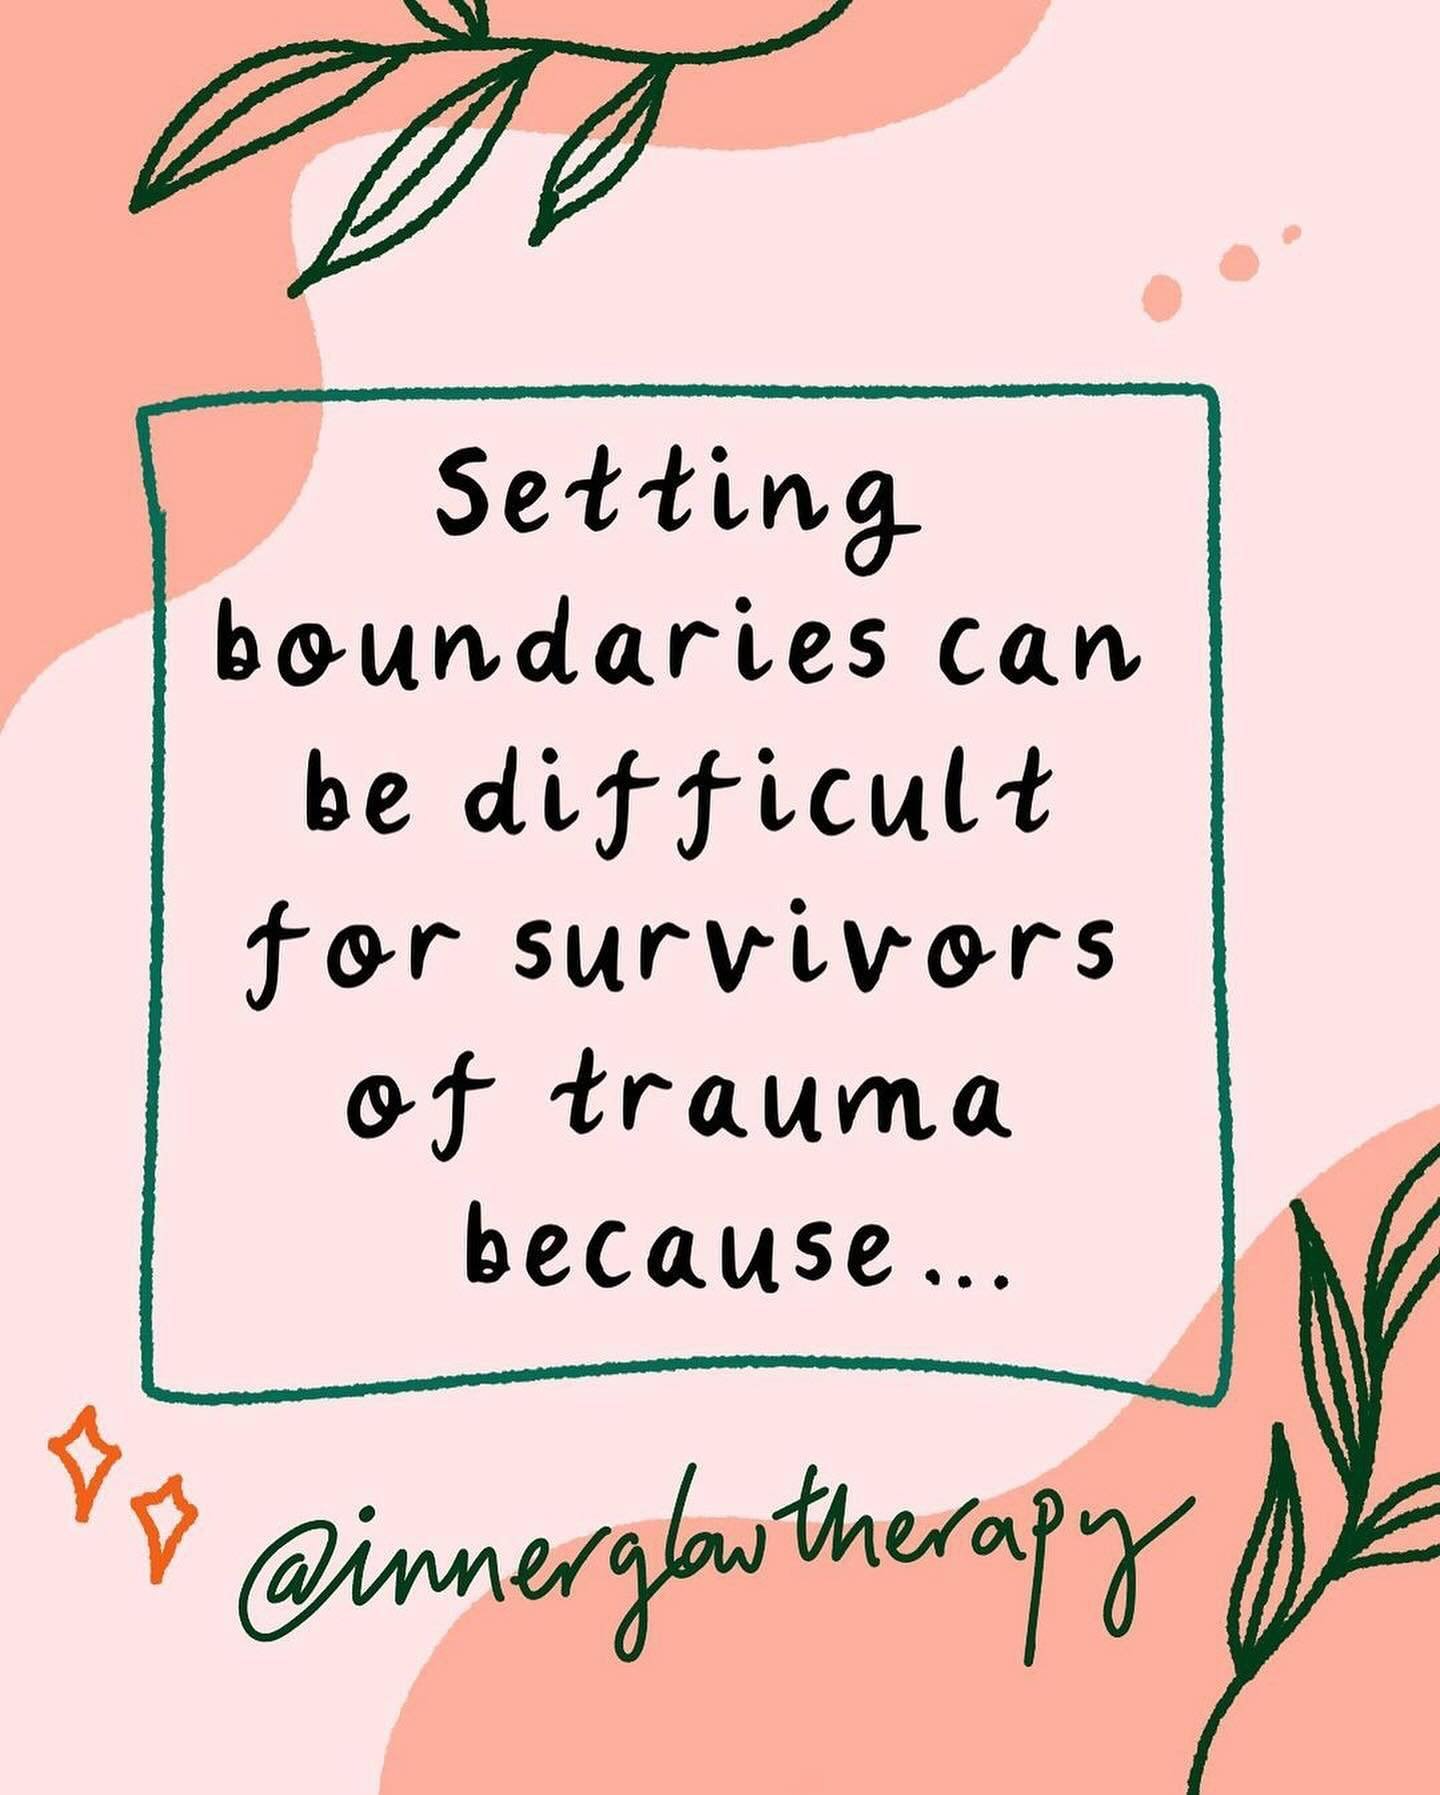 There are so many reasons why setting boundaries can be so difficult for trauma survivors. 

And here are some&hellip;

🍎 our boundaries weren&rsquo;t respected by those that hurt us 
🍎 our wants and needs we&rsquo;re undermind/ invalidated
🍎we ma